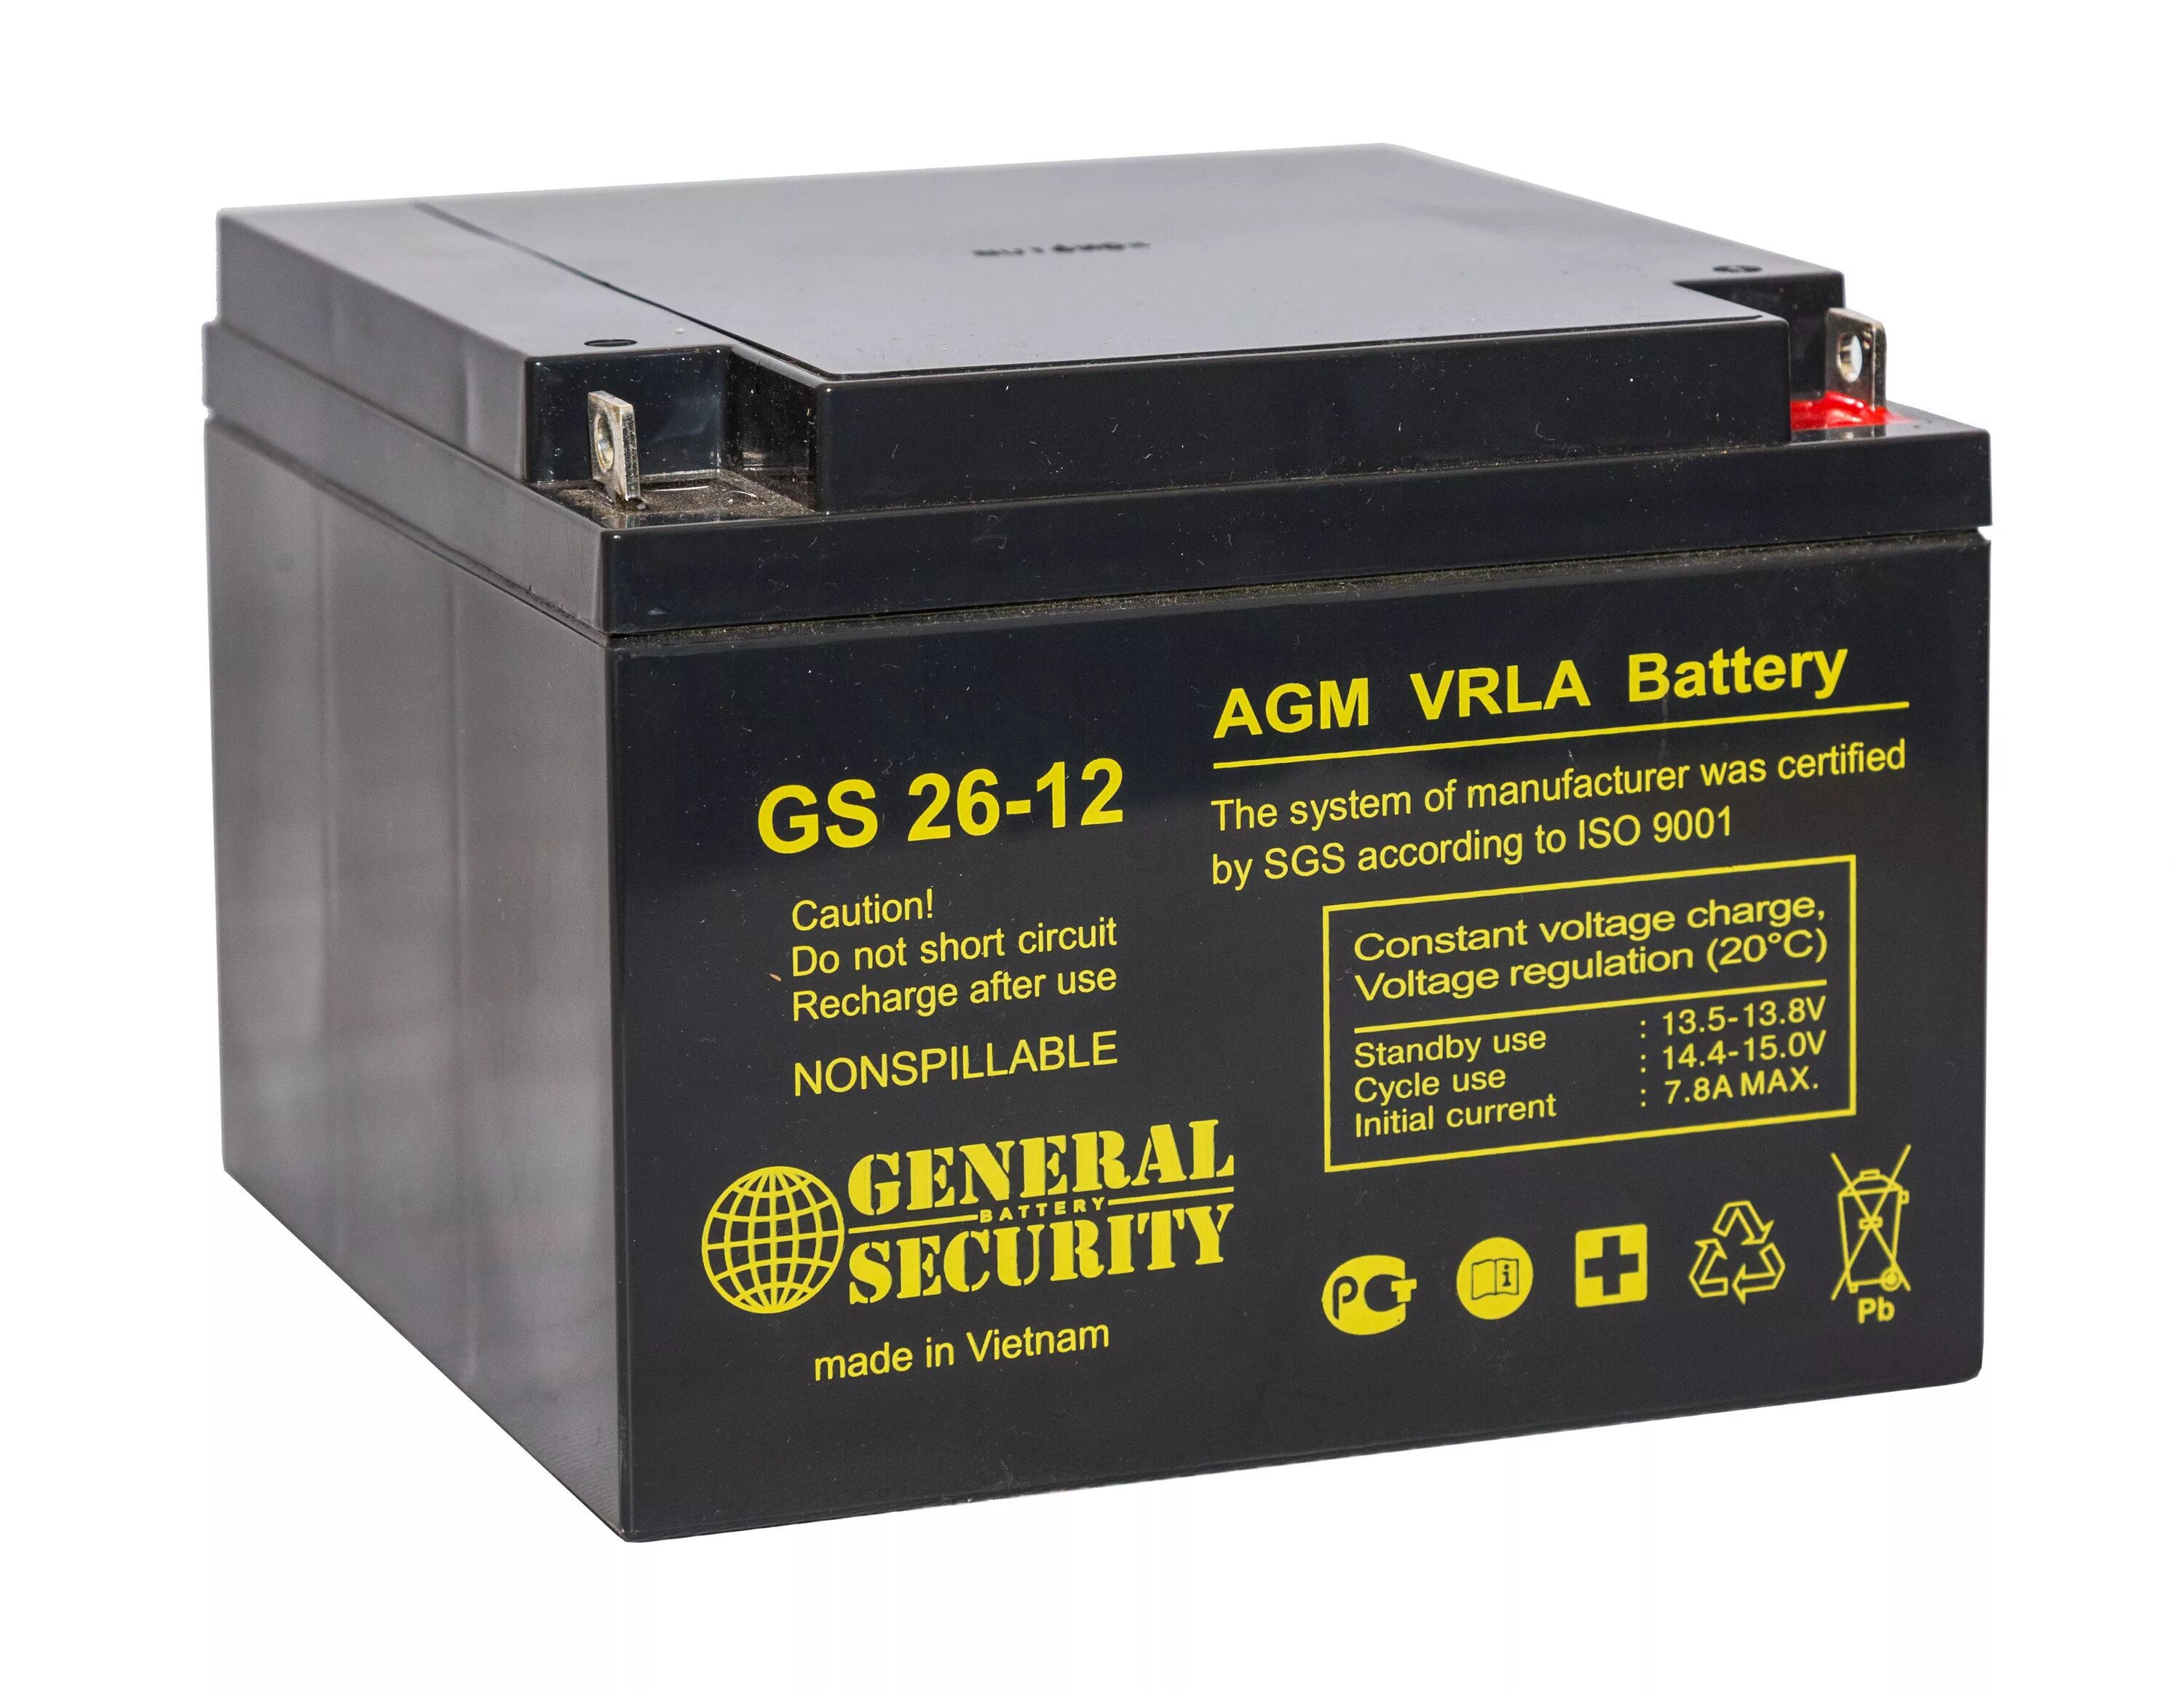 General Security GS 12-12, 12 Ач. Аккумуляторная батарейка General Security GS 12-12. Gsl12-12 General Security аккумулятор. Аккумулятор General Security GS 26-12.